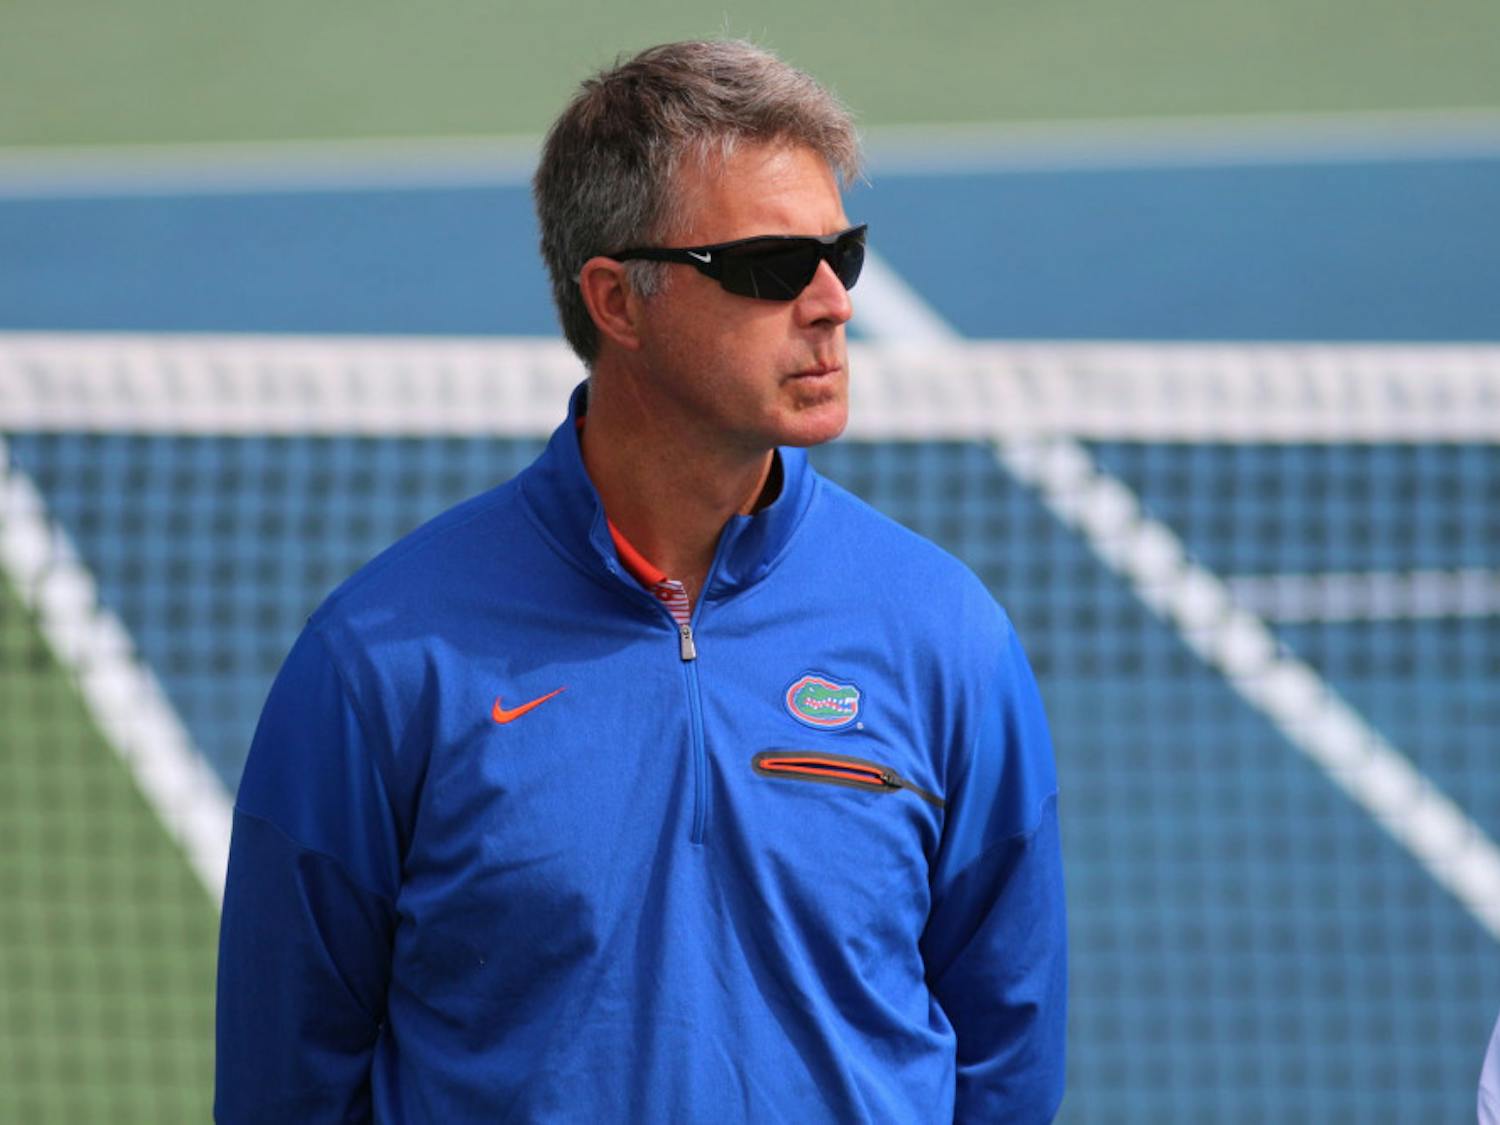 UF coach Roland Thornqvist was pleased with how freshman Marlee Zein played in Las Vegas. “She played really well from both a physical and a mental perspective,” he said.
&nbsp;